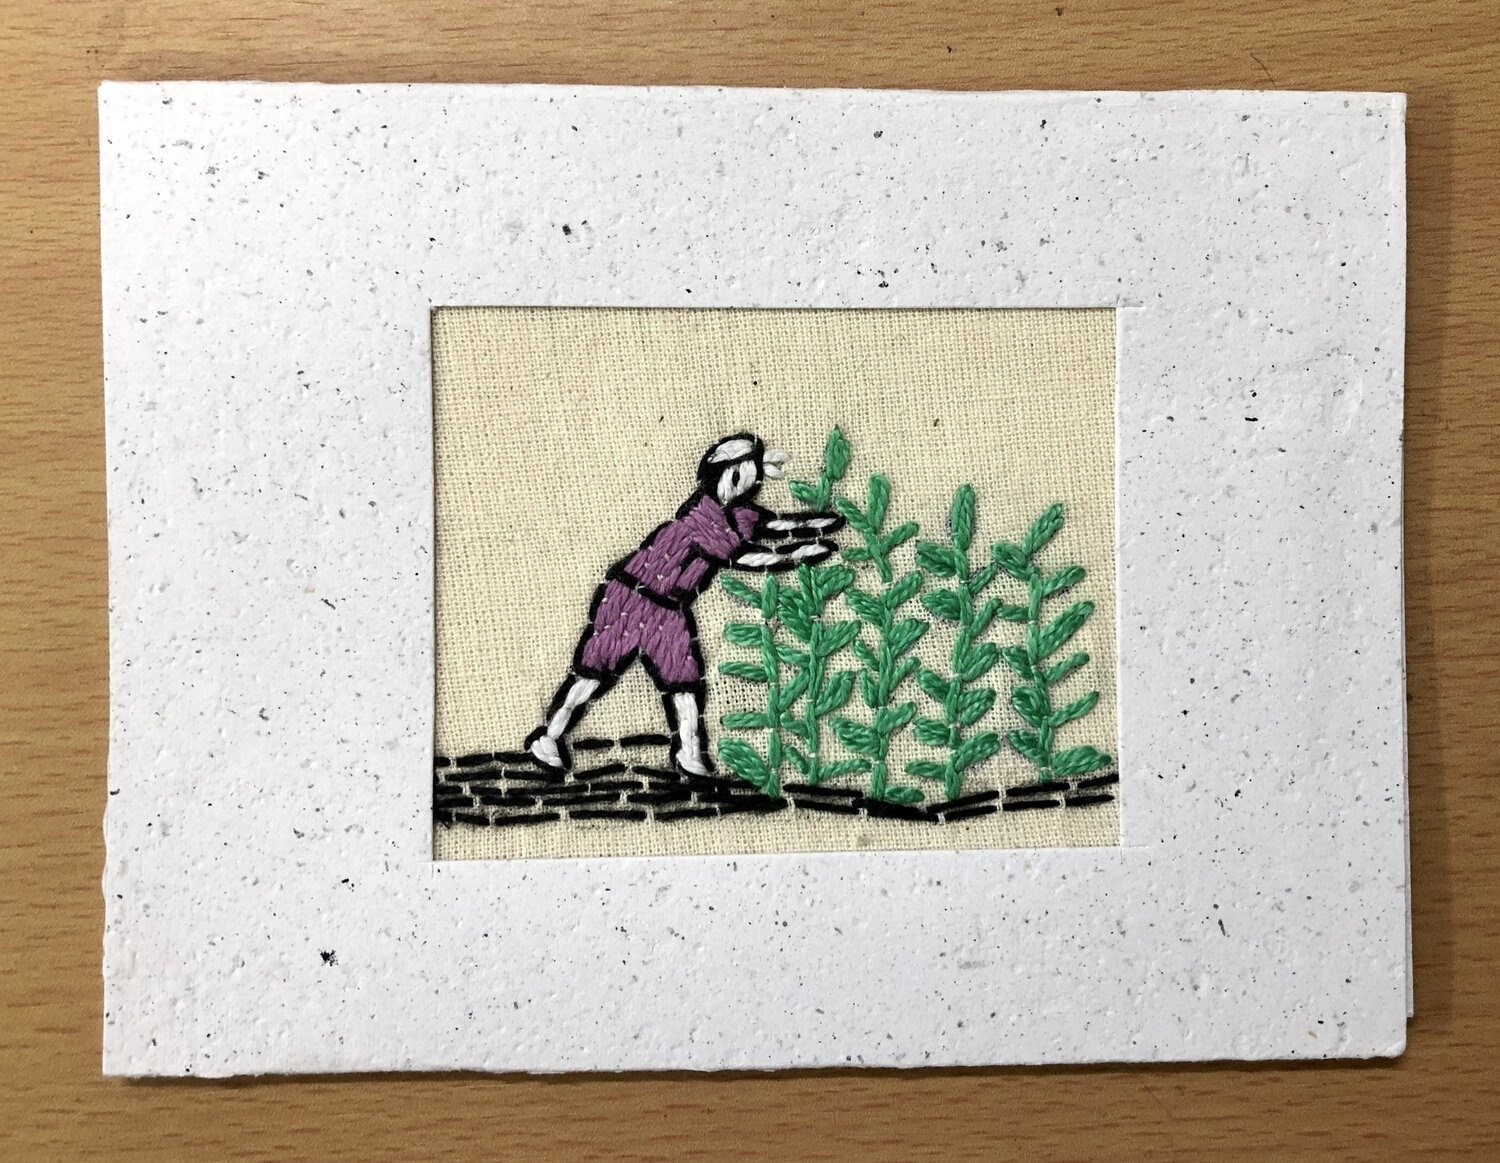 
2 Embroidered cards - Small ( Peasant ) / 10*13.5 cm / ٢ كارت تطريز - صغير ( ريف )
